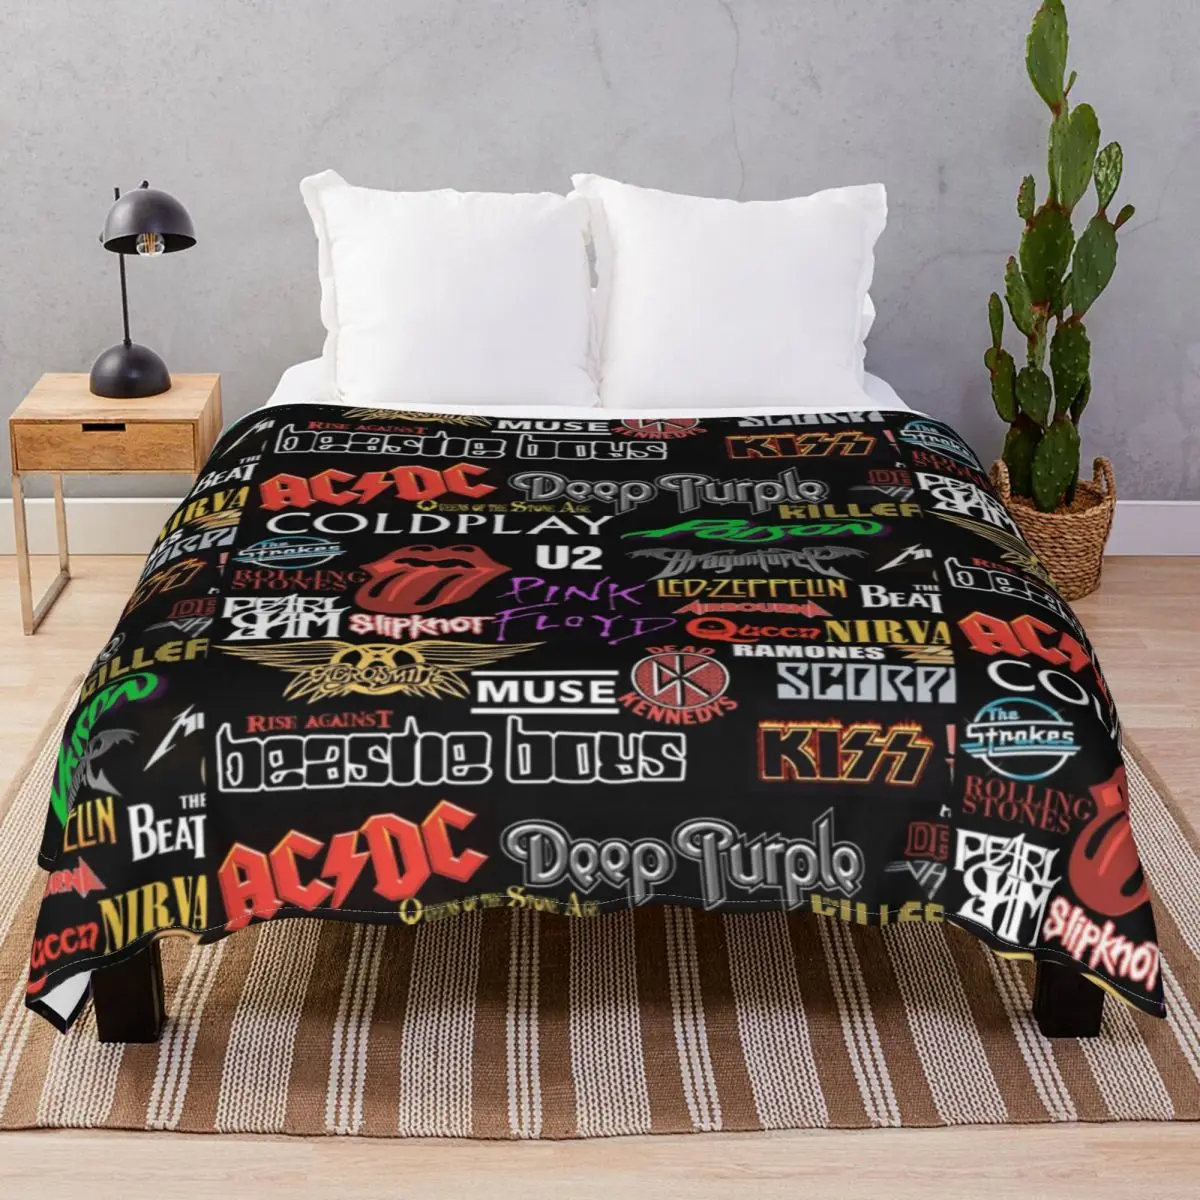 Copy Of Rock Metal Heavy Bands Blanket Fleece Summer Breathable Throw Blankets for Bed Home Couch Travel Cinema